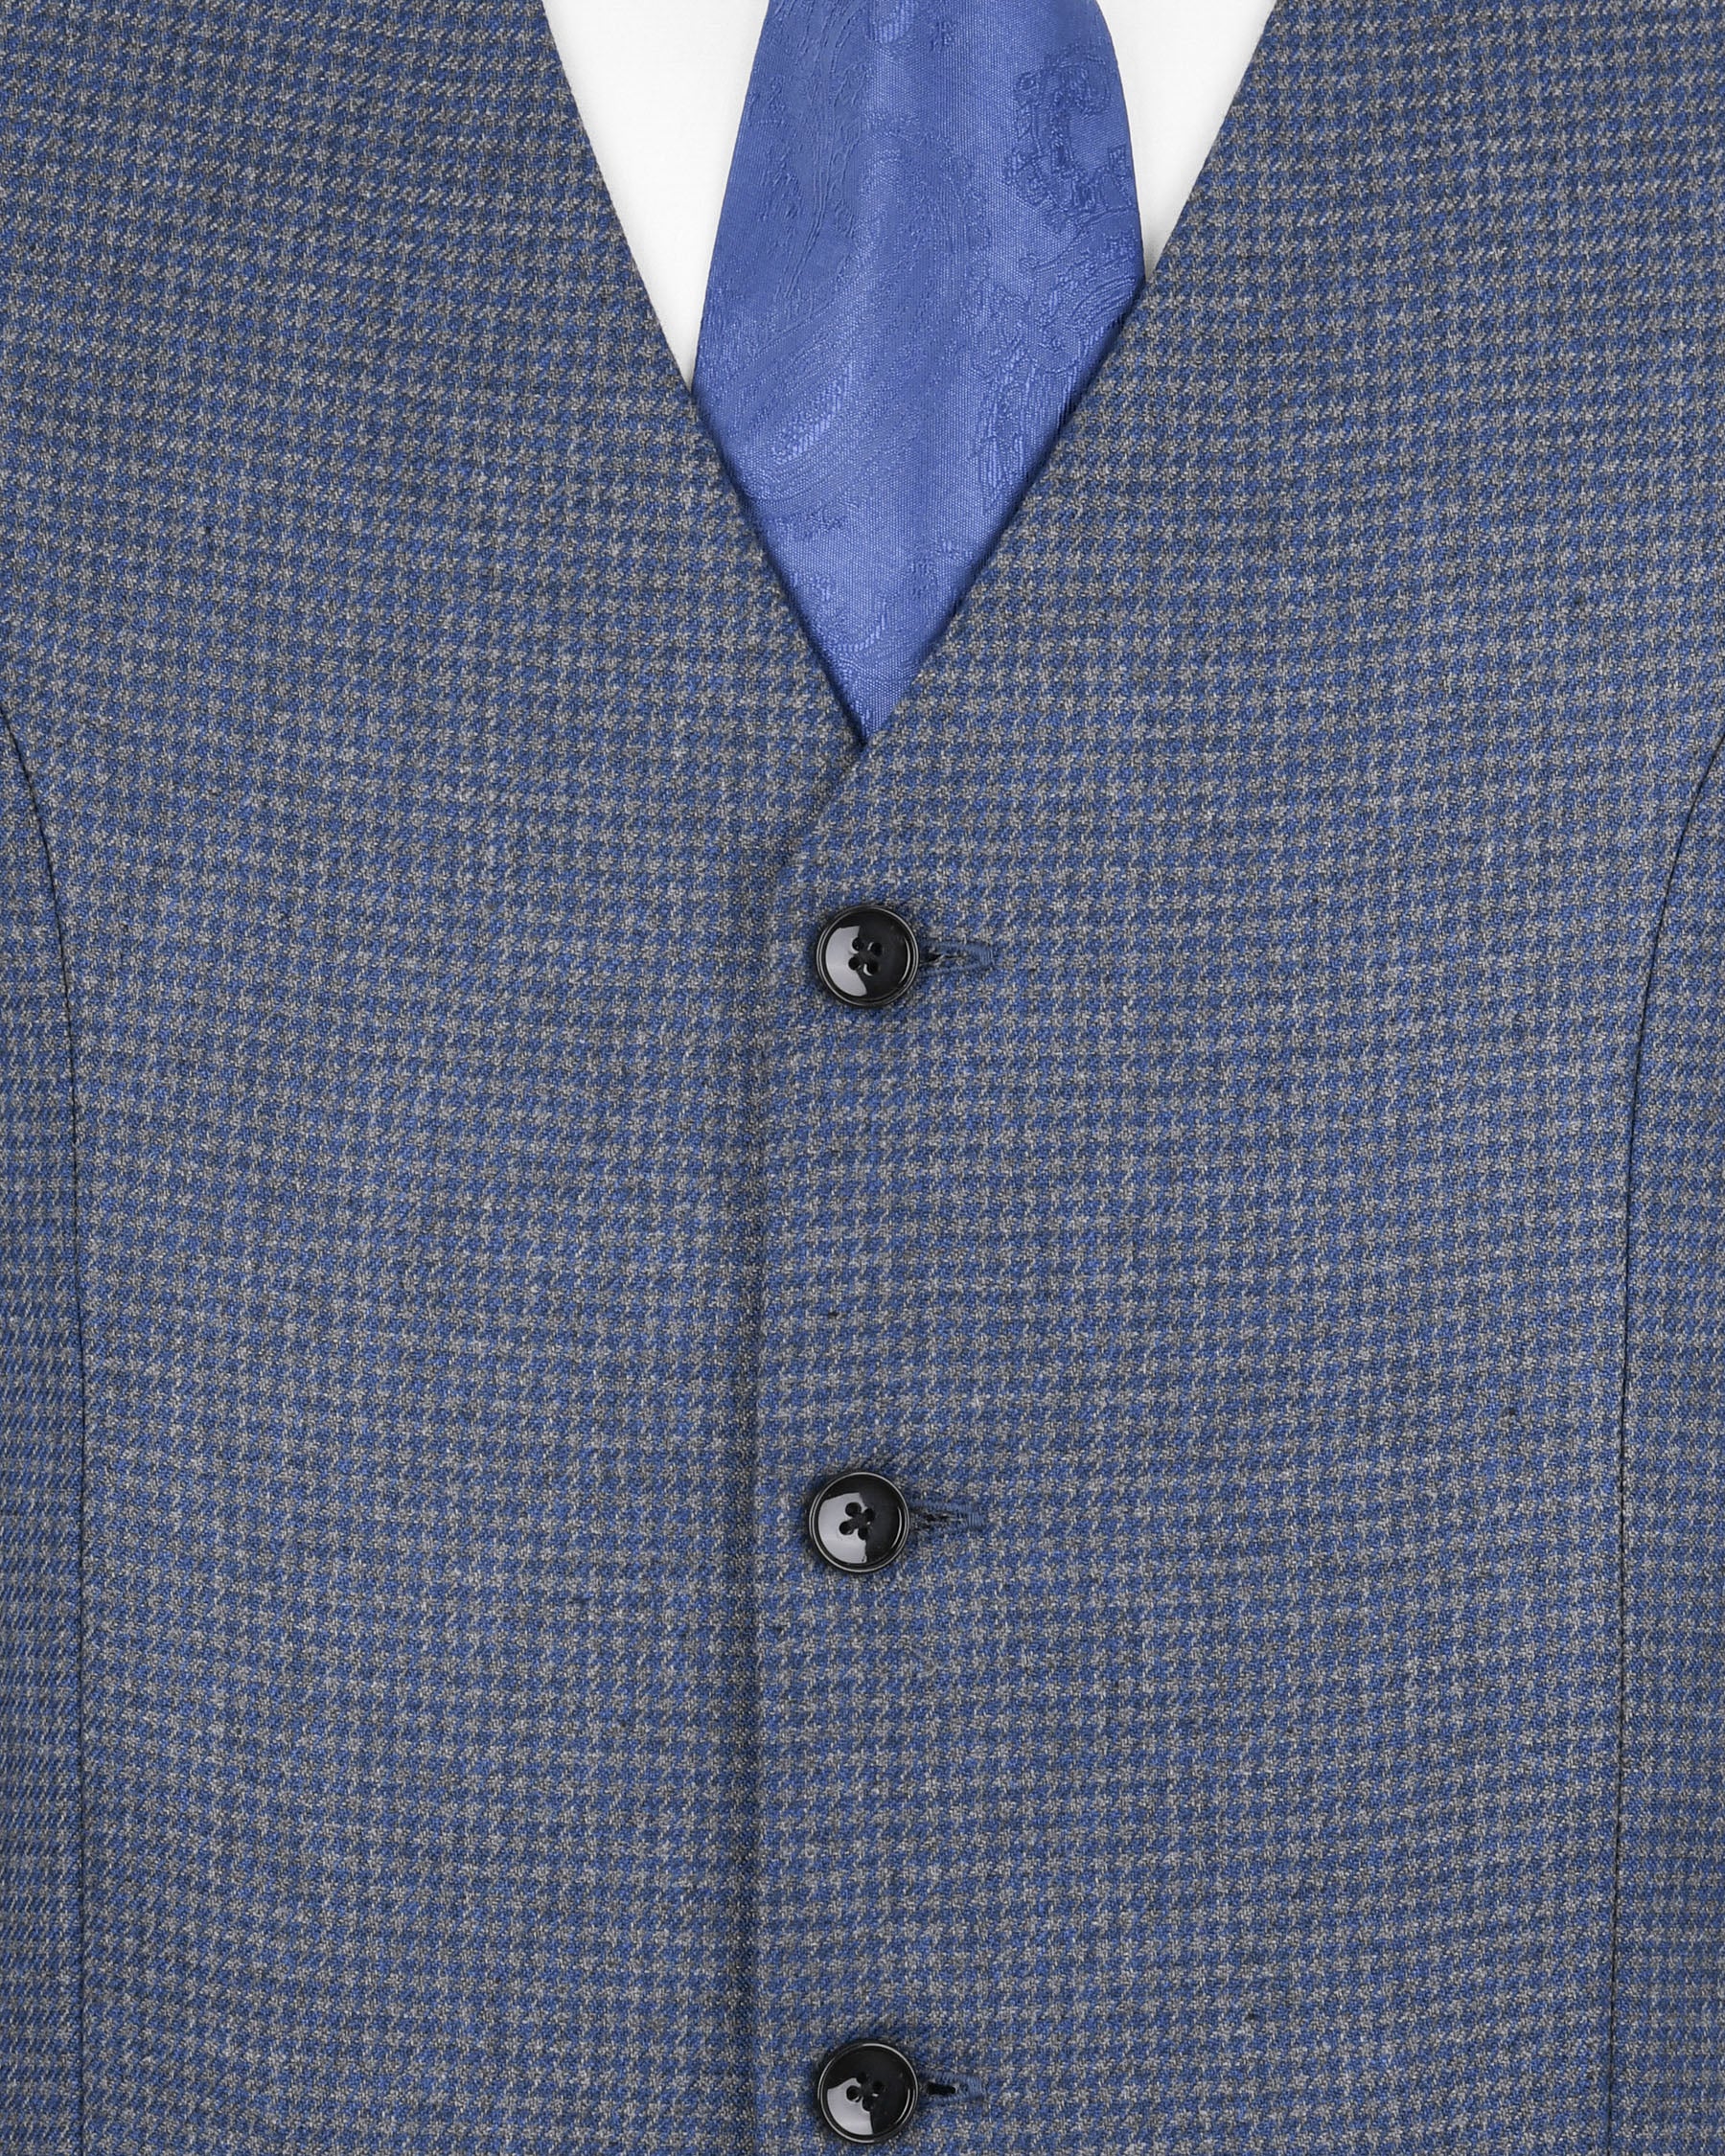 Soya Bean Grey with Rhino Blue Woolrich Herringbone Checked Double Breasted Sports Suit